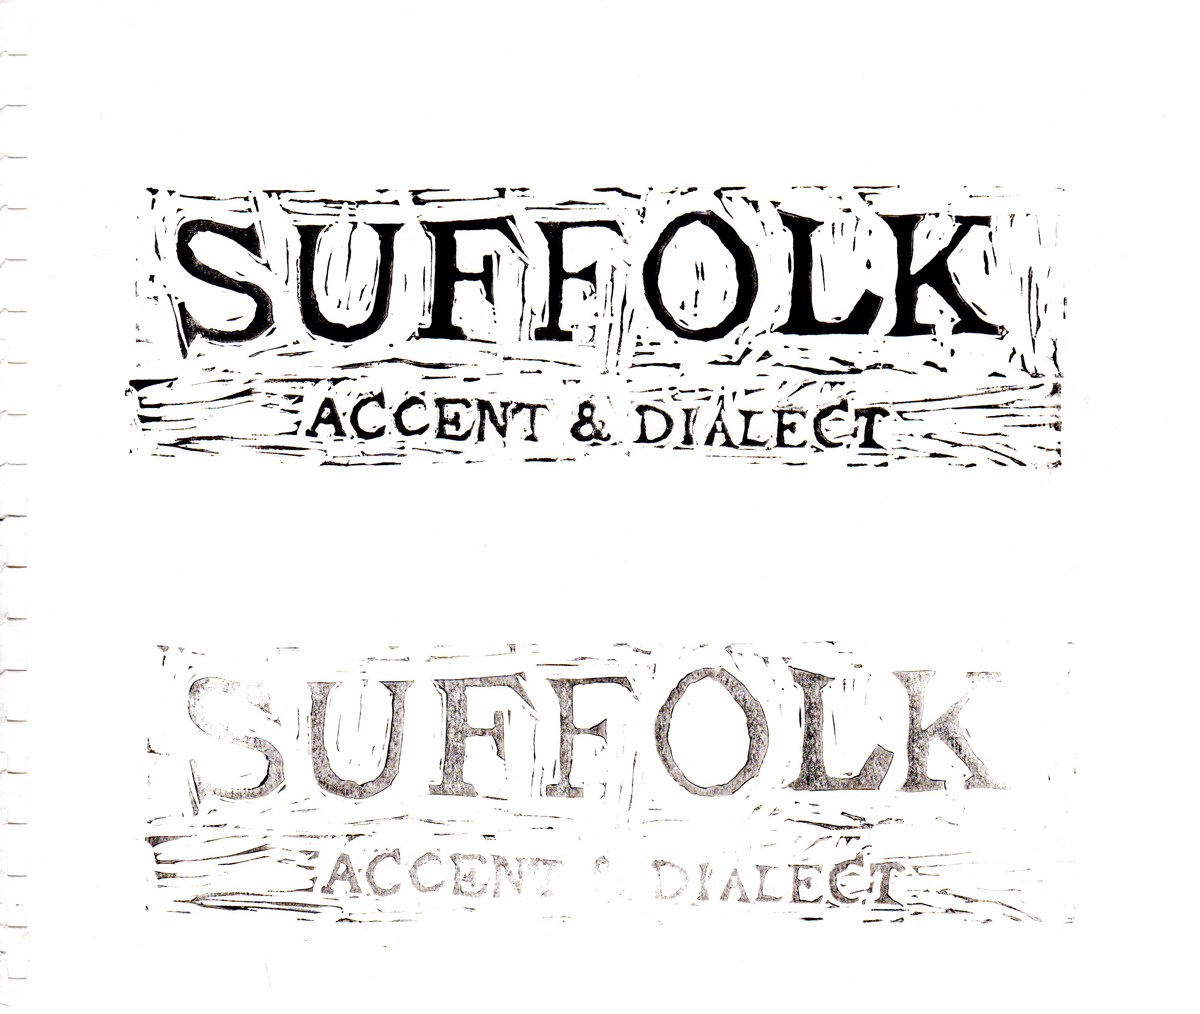 brand logo countryside Suffolk Apppreciation accent dialect rural rustic natural Ipswich Business Cards Action Figure Speaking